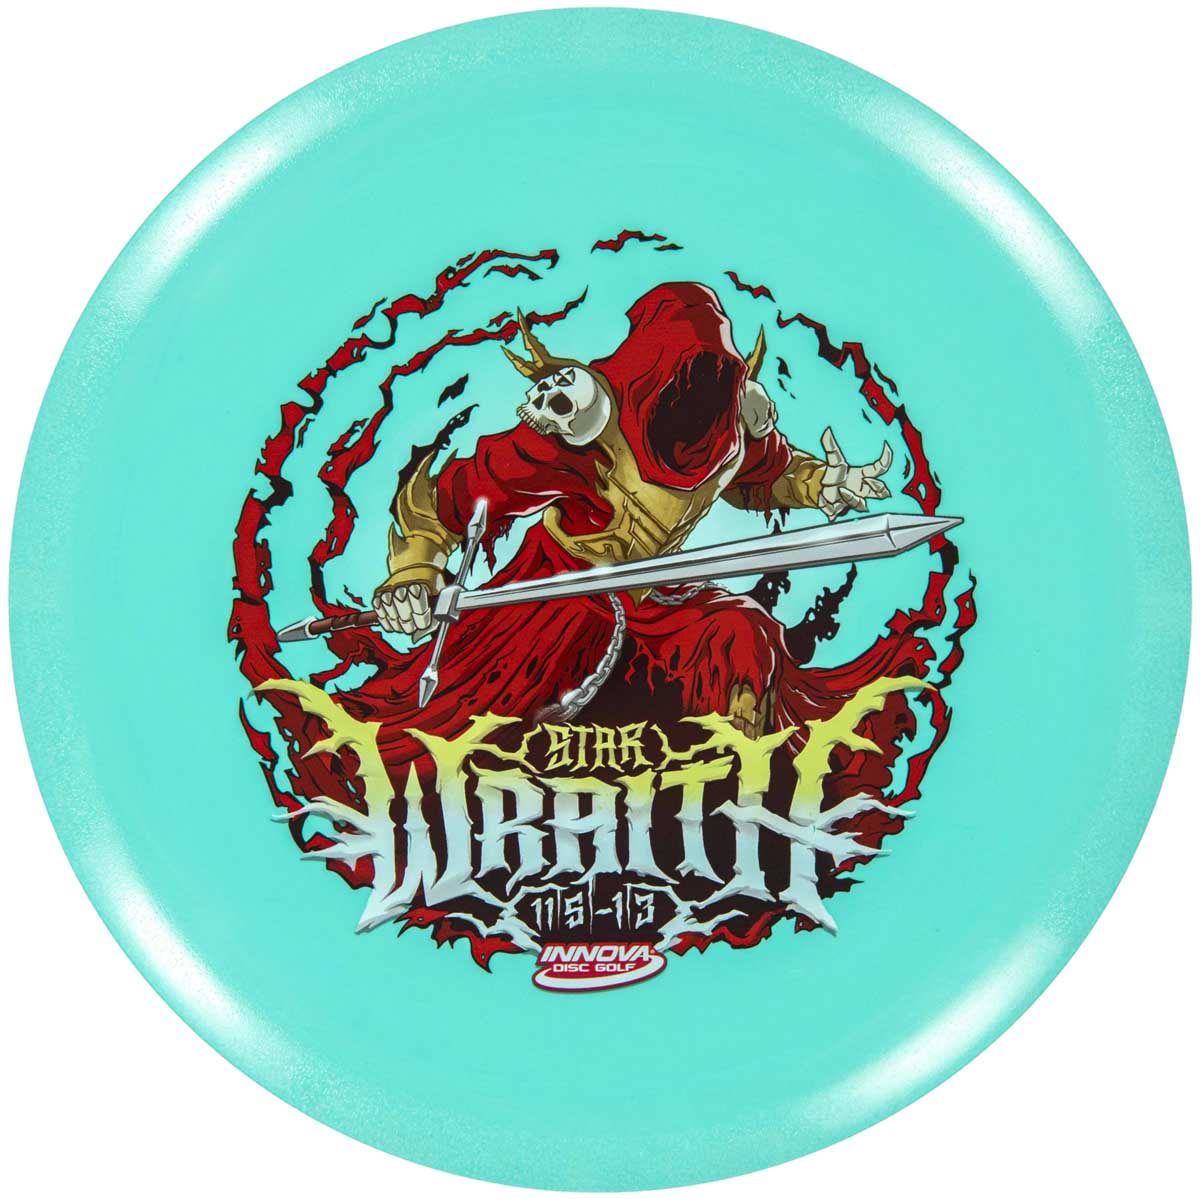 Full Color Disc - InnVision Wraith - Star Distance Driver. Teal color. 